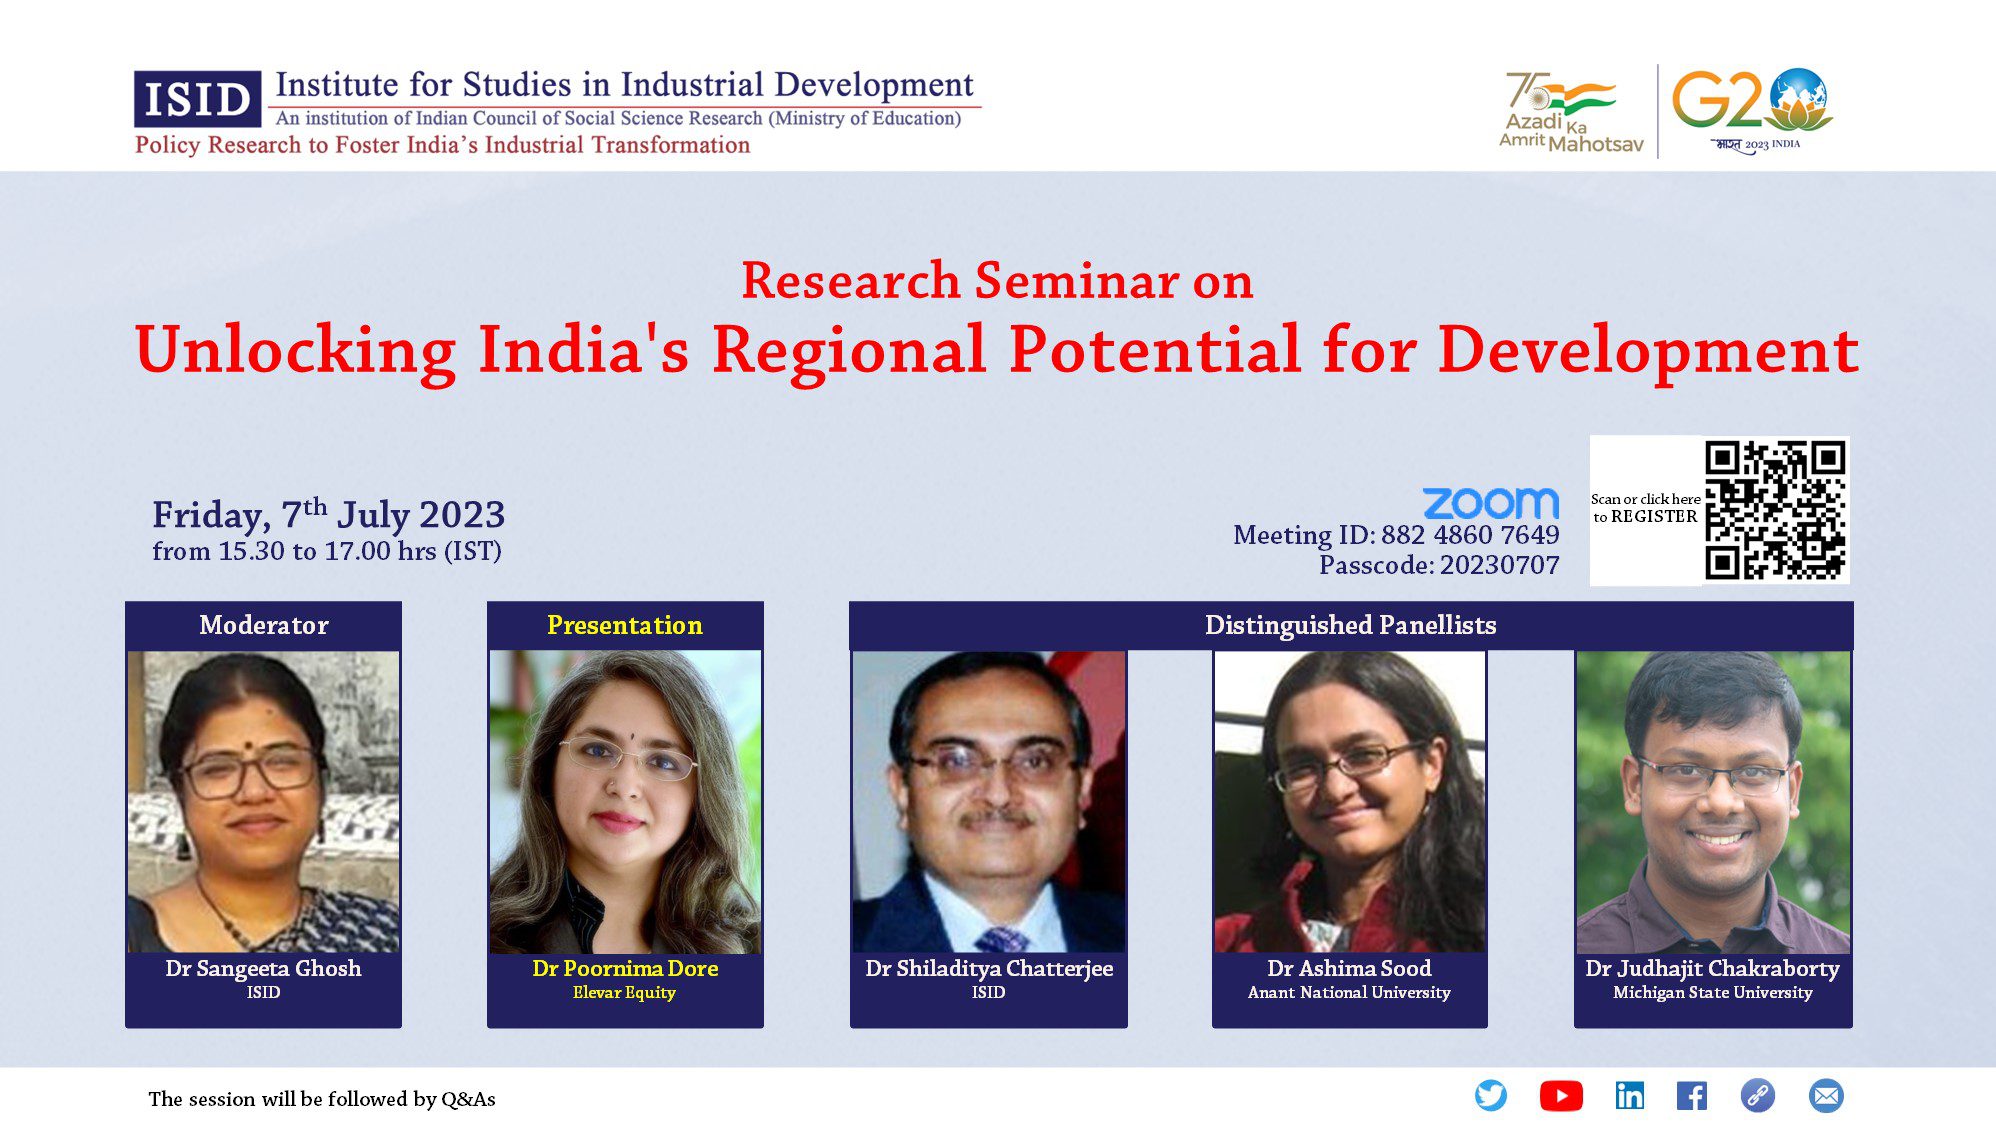 Research Seminar on Unlocking India's Regional Potential for Development